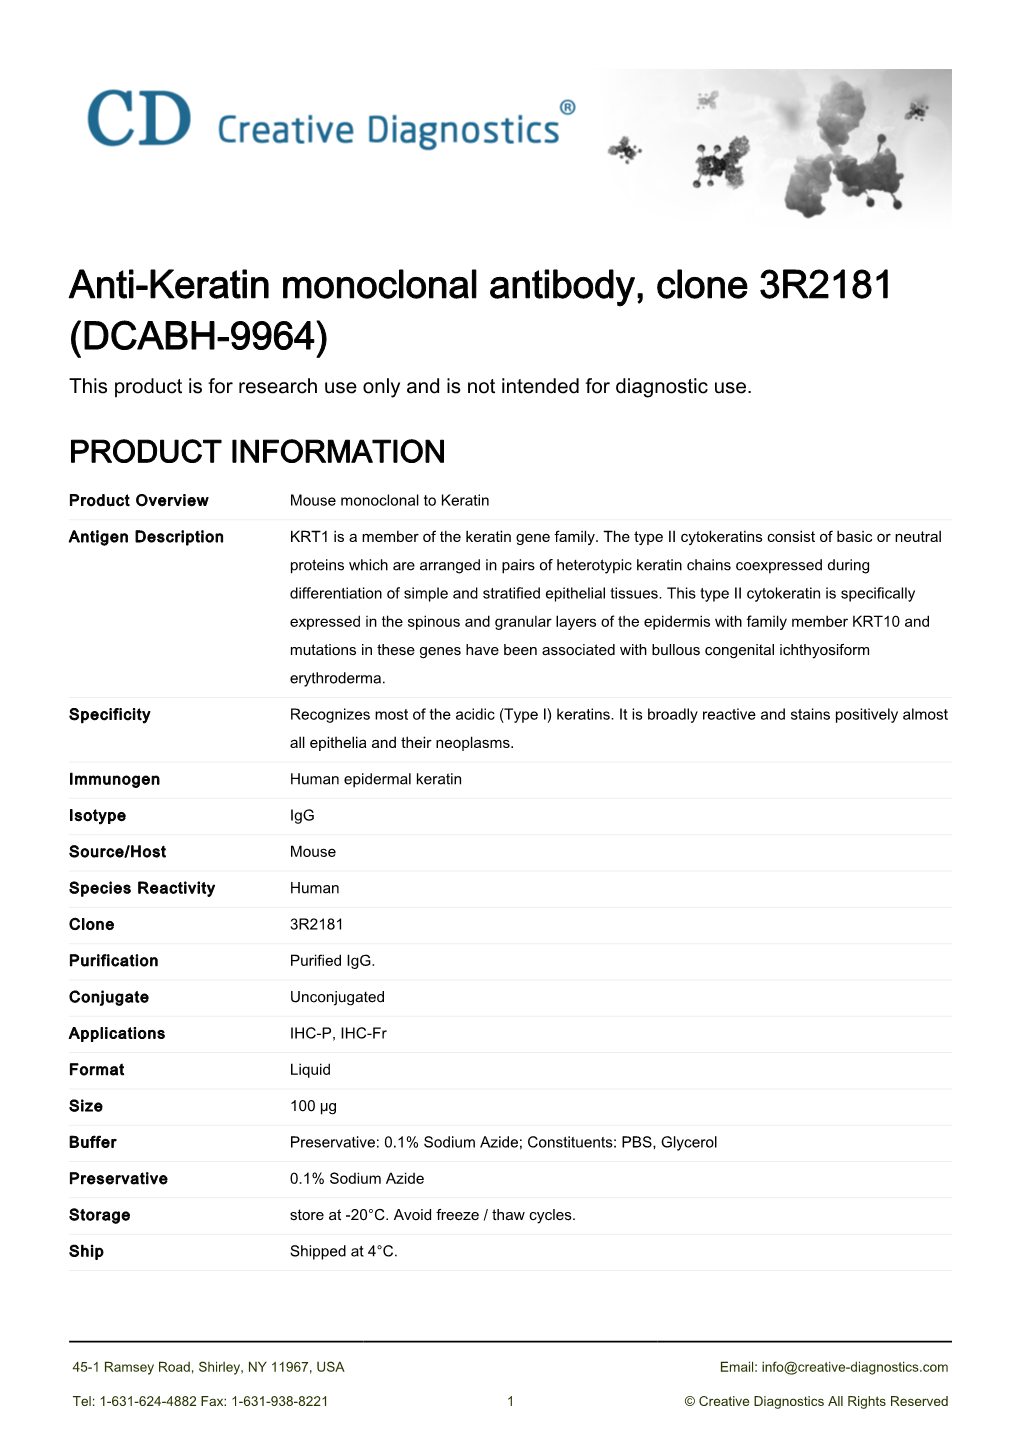 Anti-Keratin Monoclonal Antibody, Clone 3R2181 (DCABH-9964) This Product Is for Research Use Only and Is Not Intended for Diagnostic Use